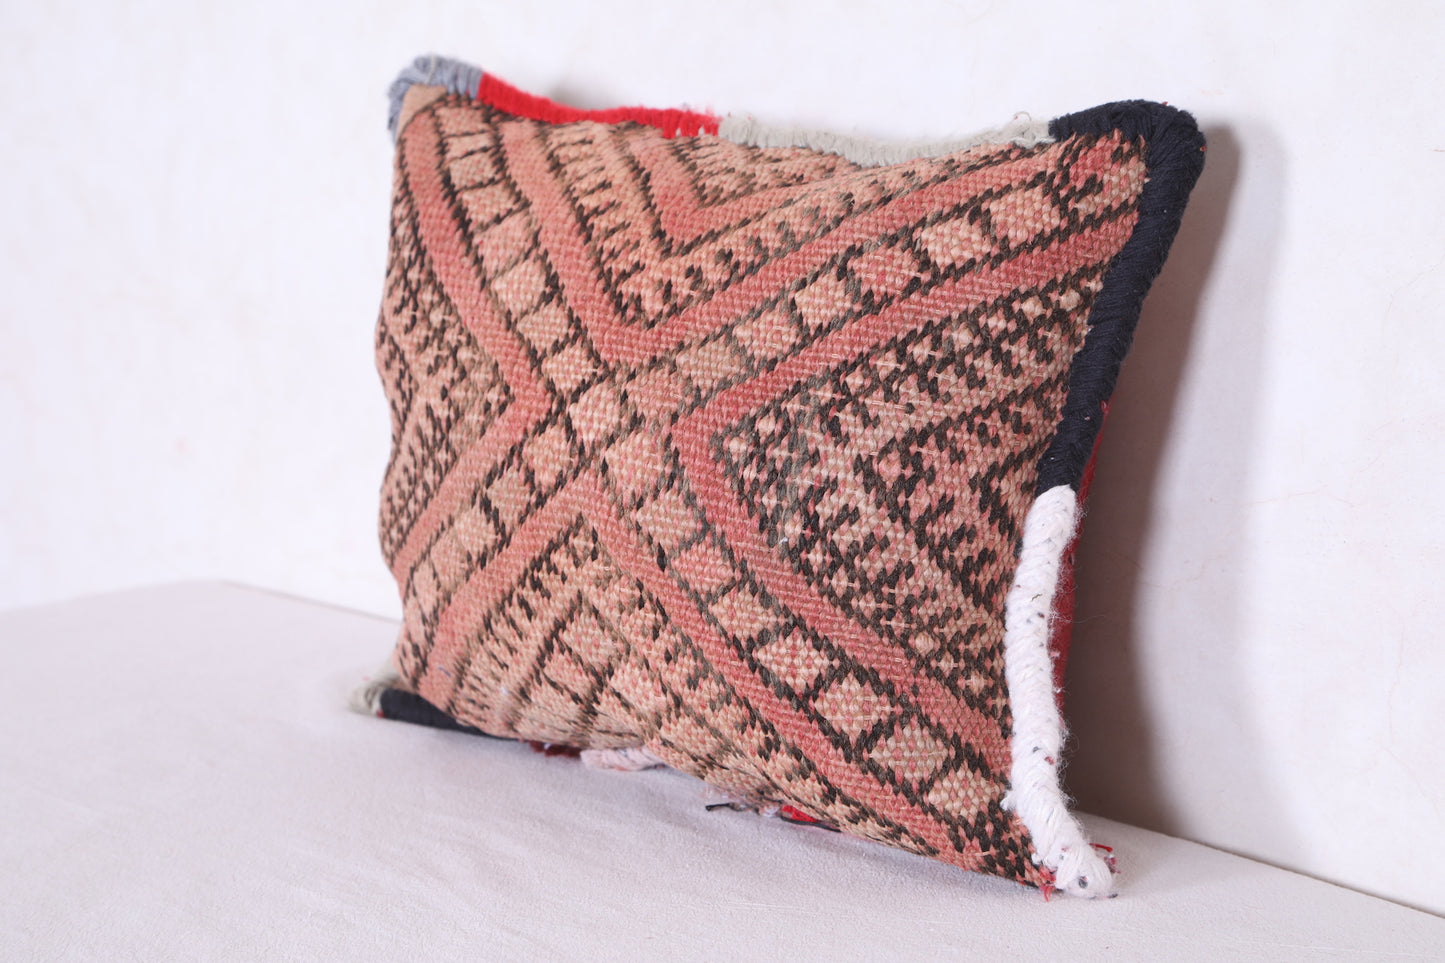 Moroccan handmade kilim pillow 14.5 INCHES X 18.1 INCHES